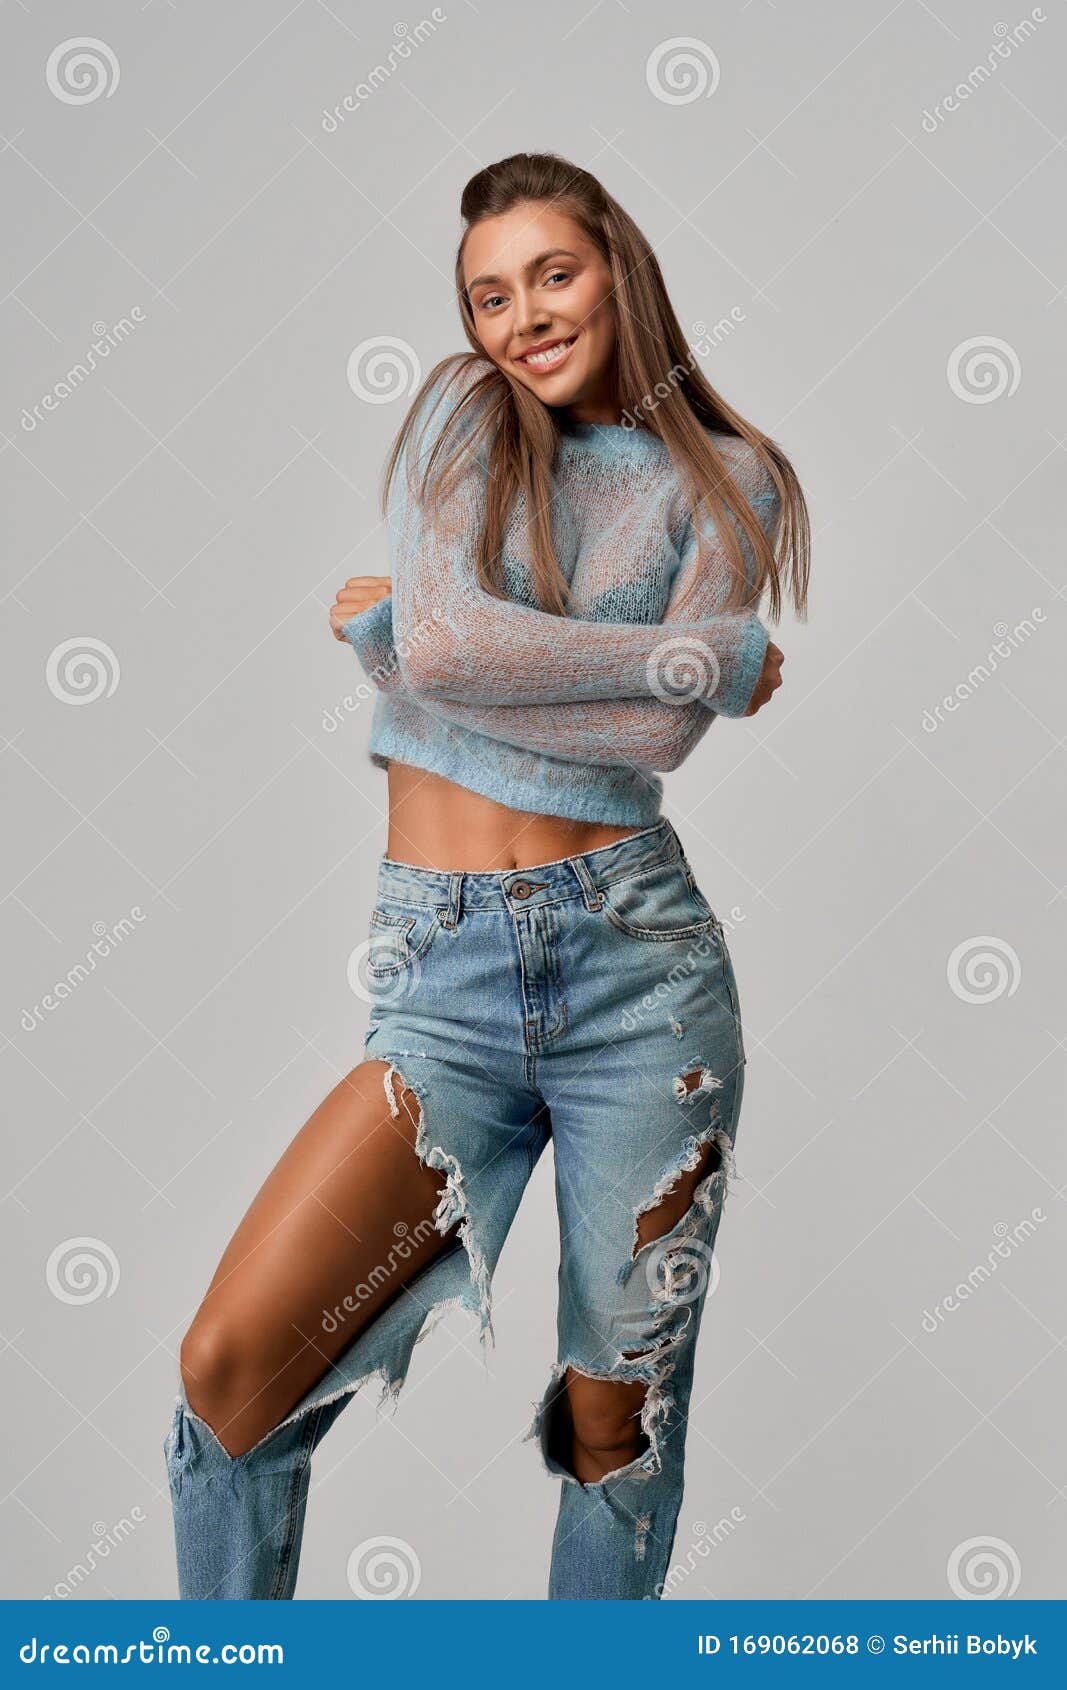 Smiling Girl Hugging Herself in Short Top, Ripped Jeans. Stock Photo of sunburnt, cheerful: 169062068